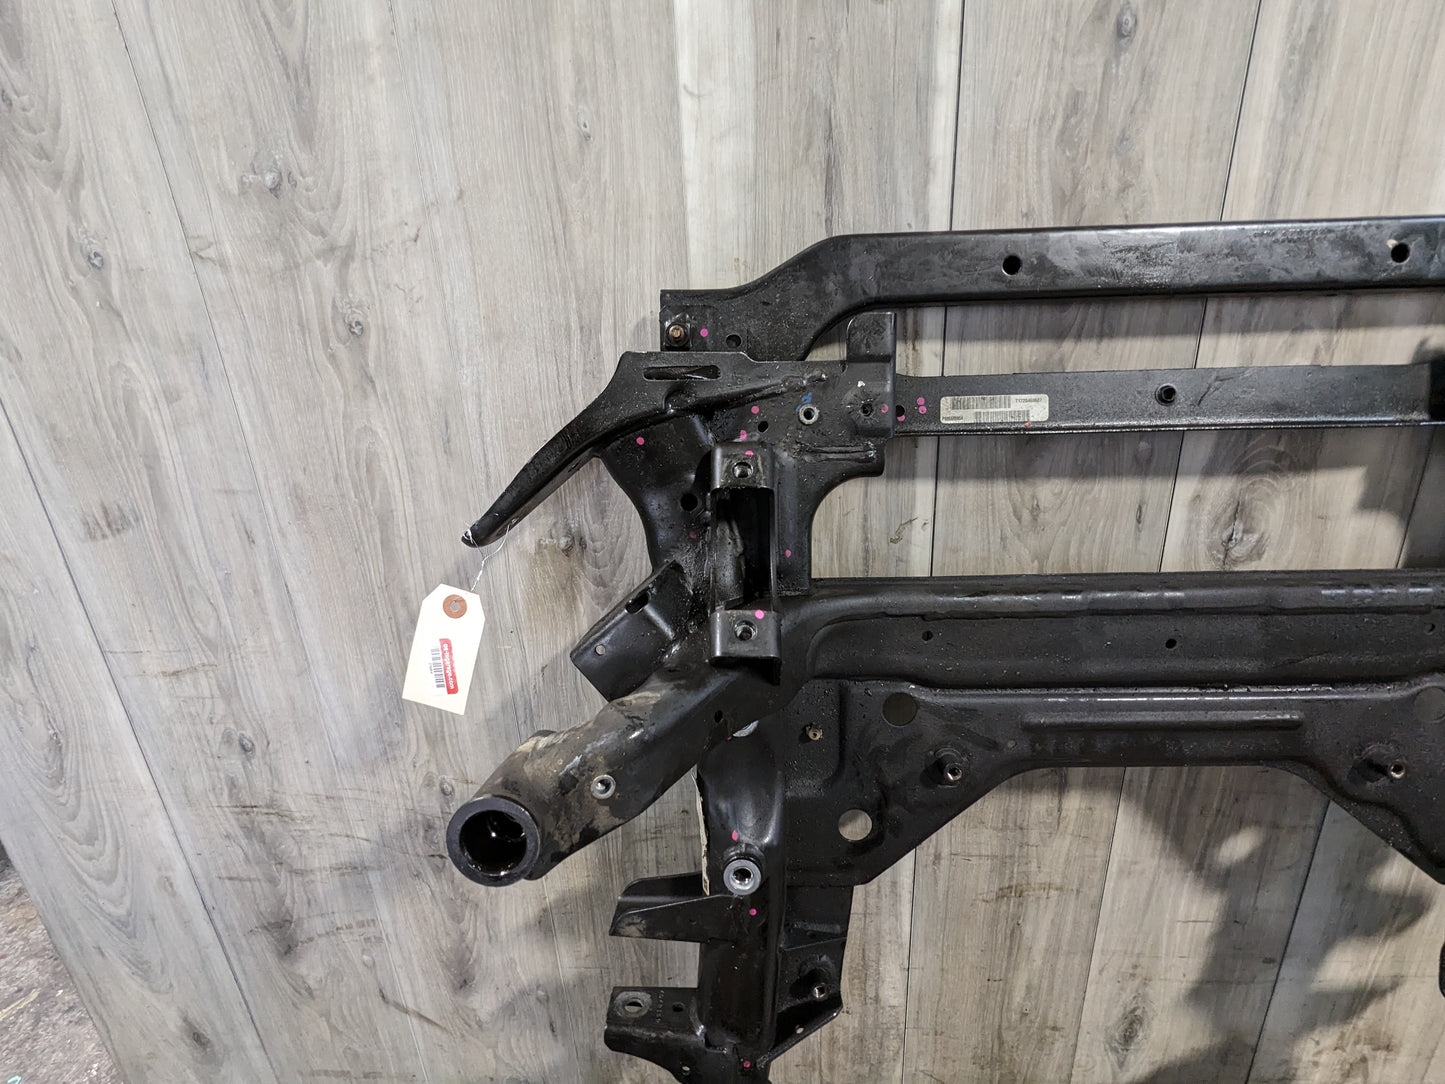 OEM BMW F15 F85 F86 X5 M X6 Front Axle Support Suspension Subframe K-Frame AWD